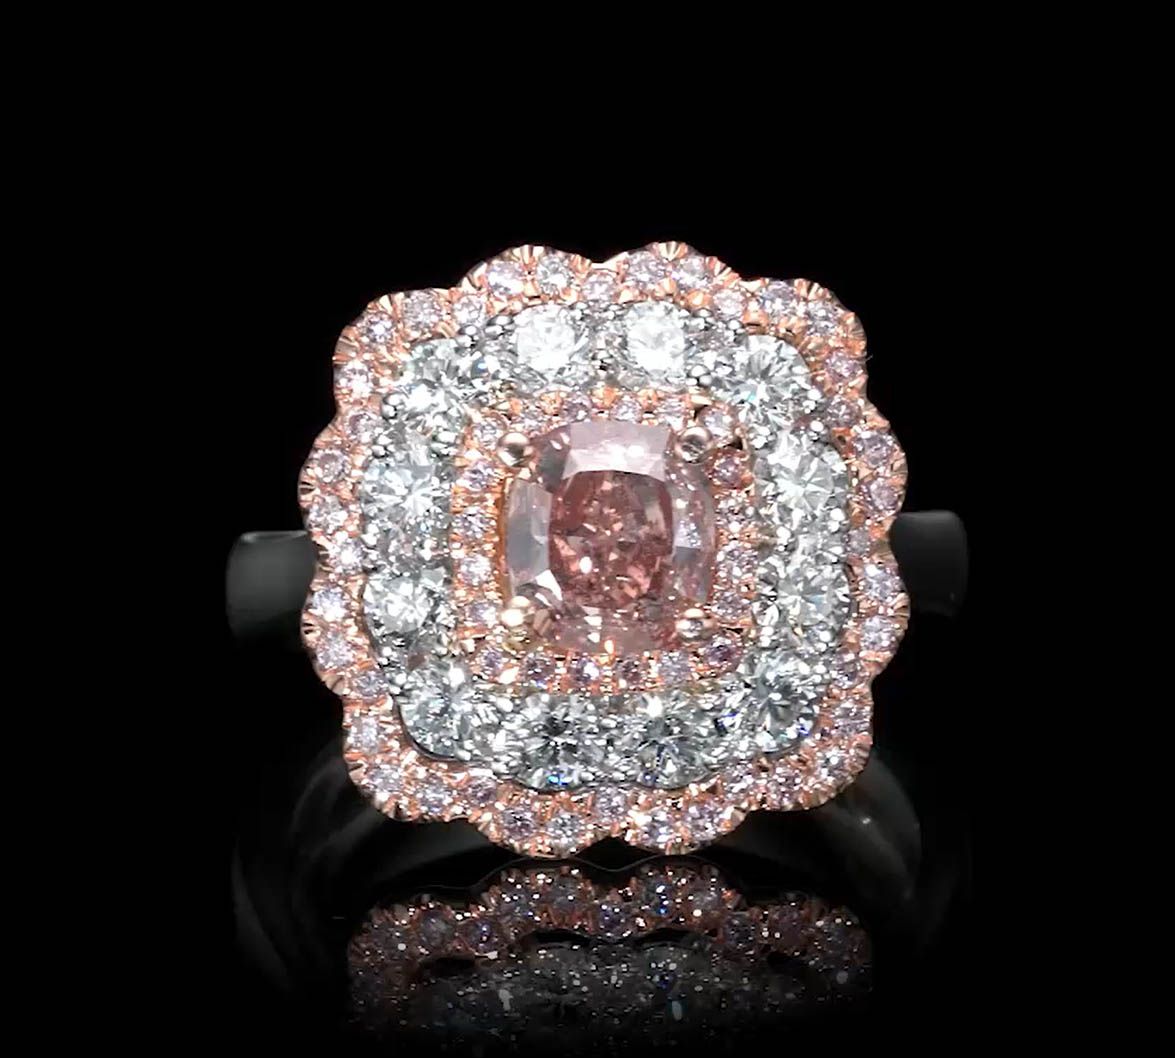 Ring with 0.40ct Fancy Light Pink, 1.17ct Small White and Pink Diamonds